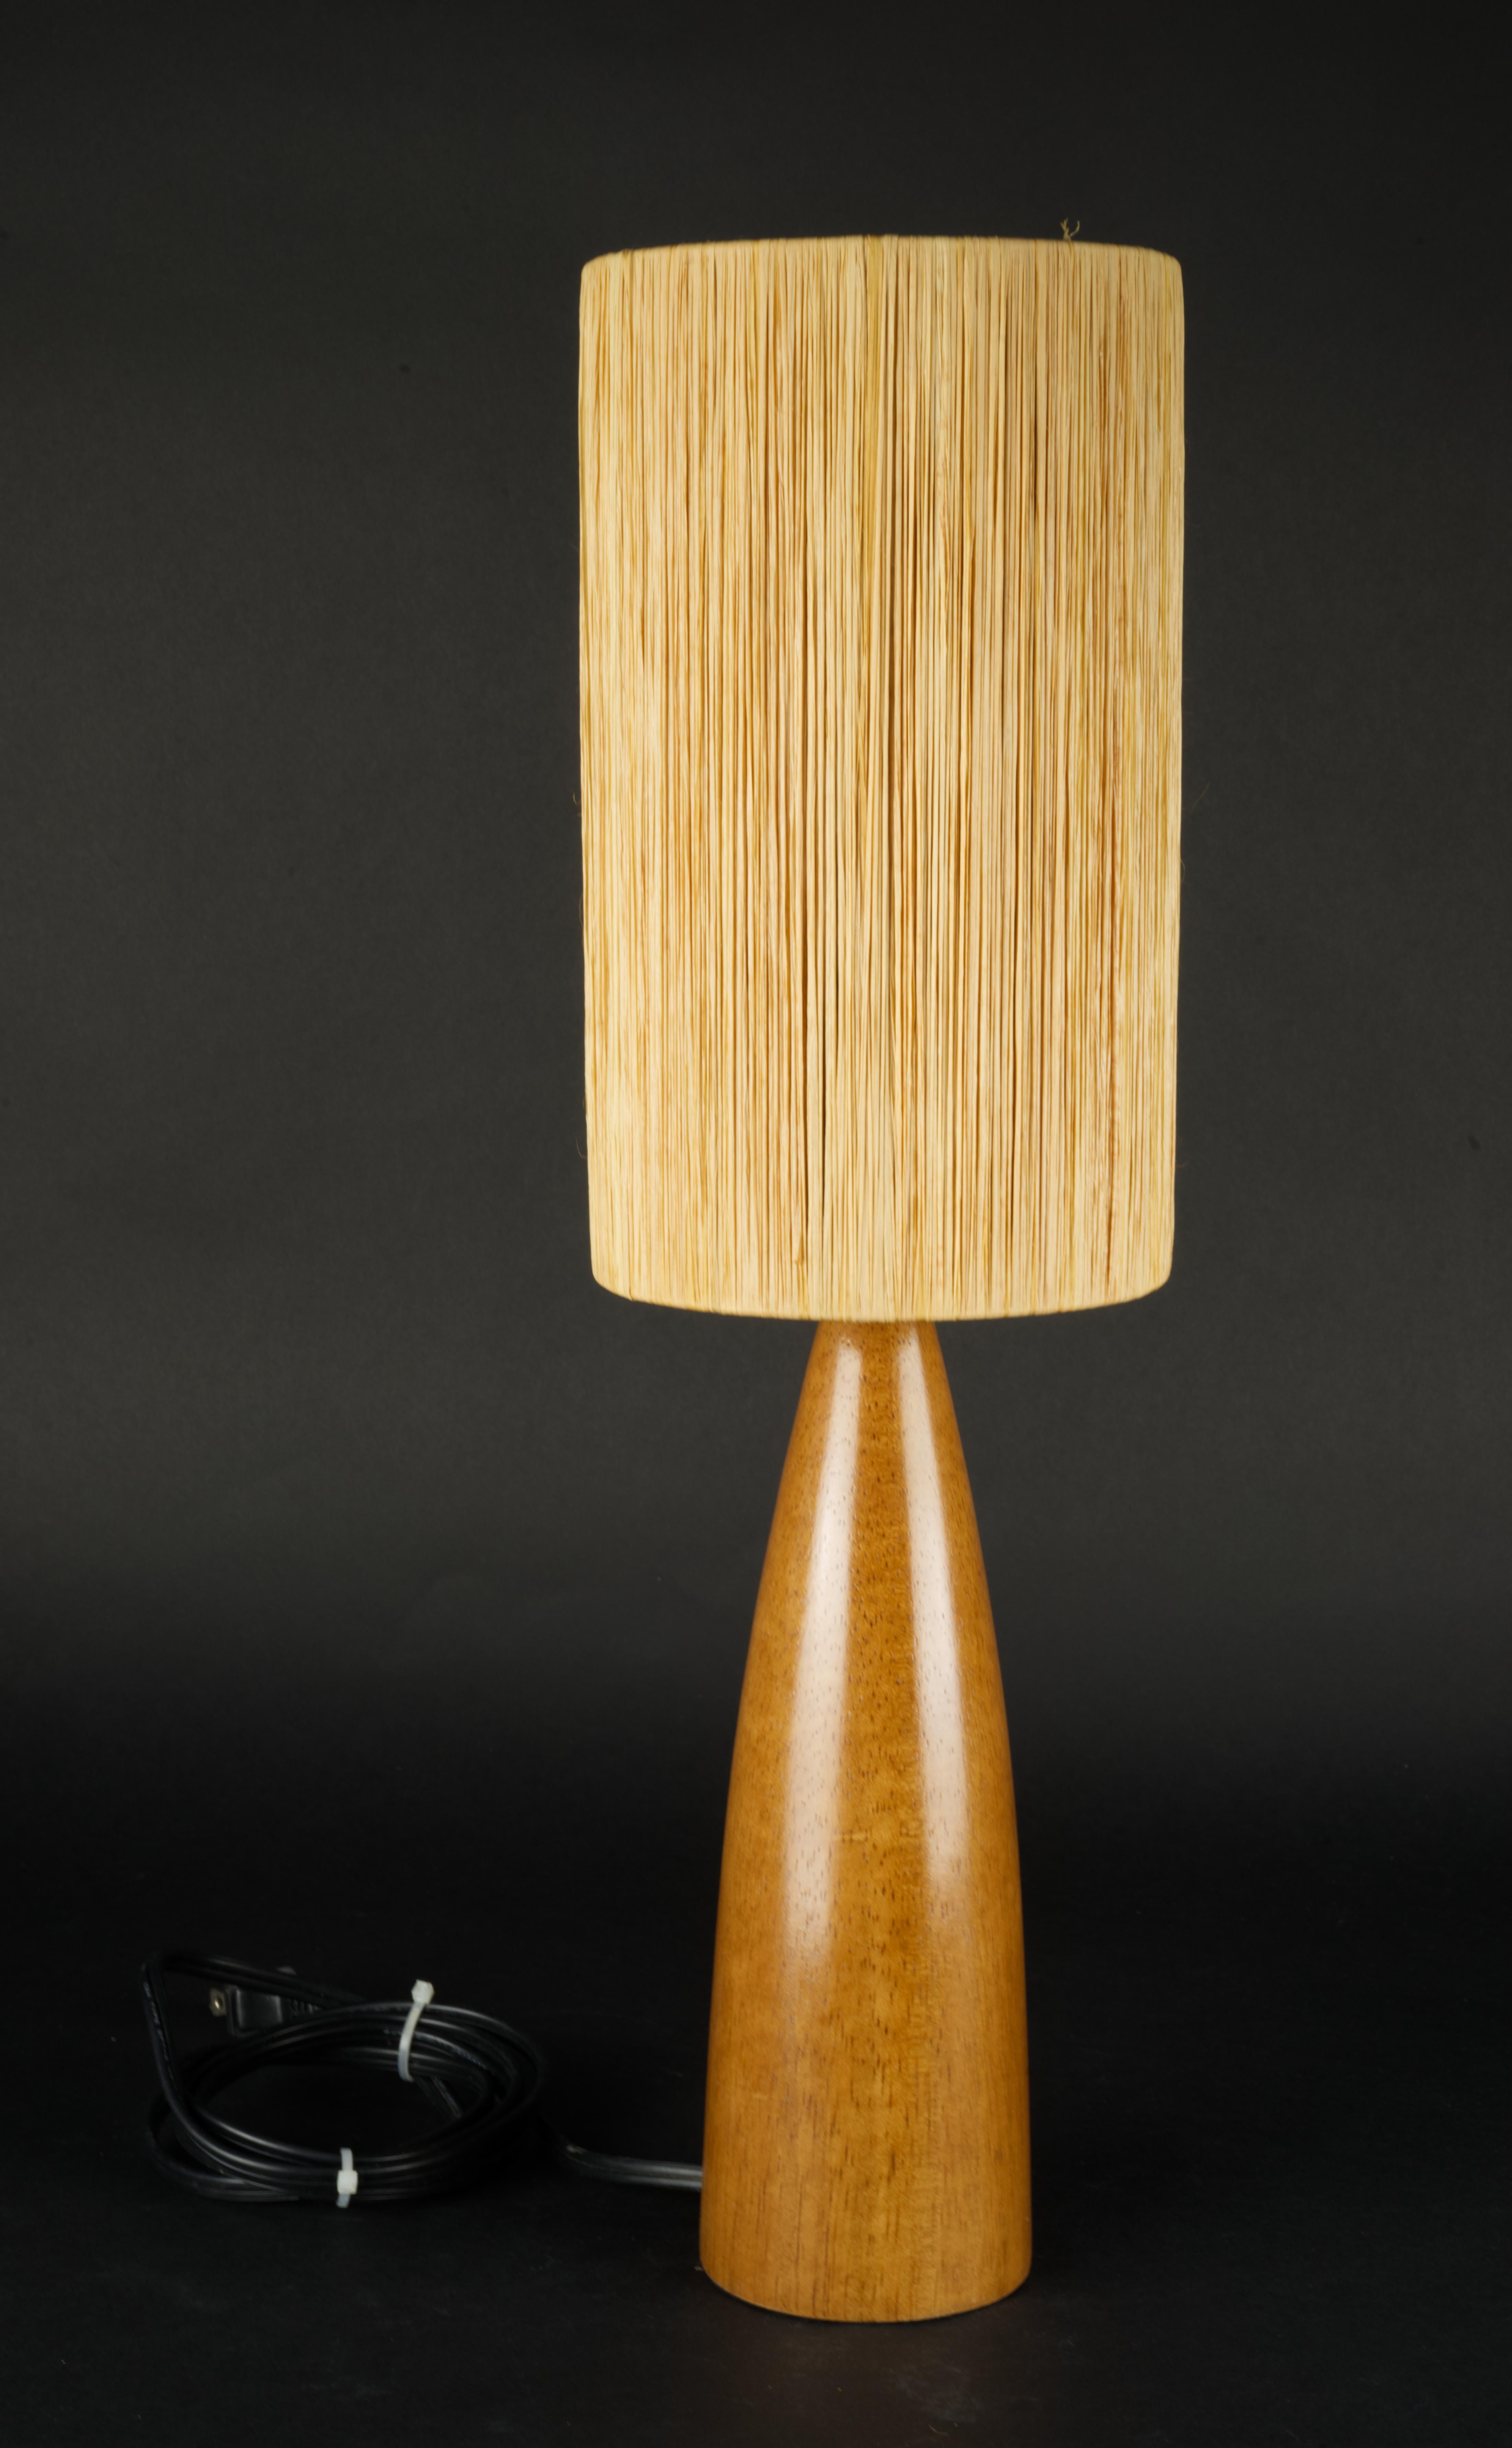 Scandinavian Modern Teak Accent Table Lamp with Original Straw Shade, Mid Centur For Sale 4